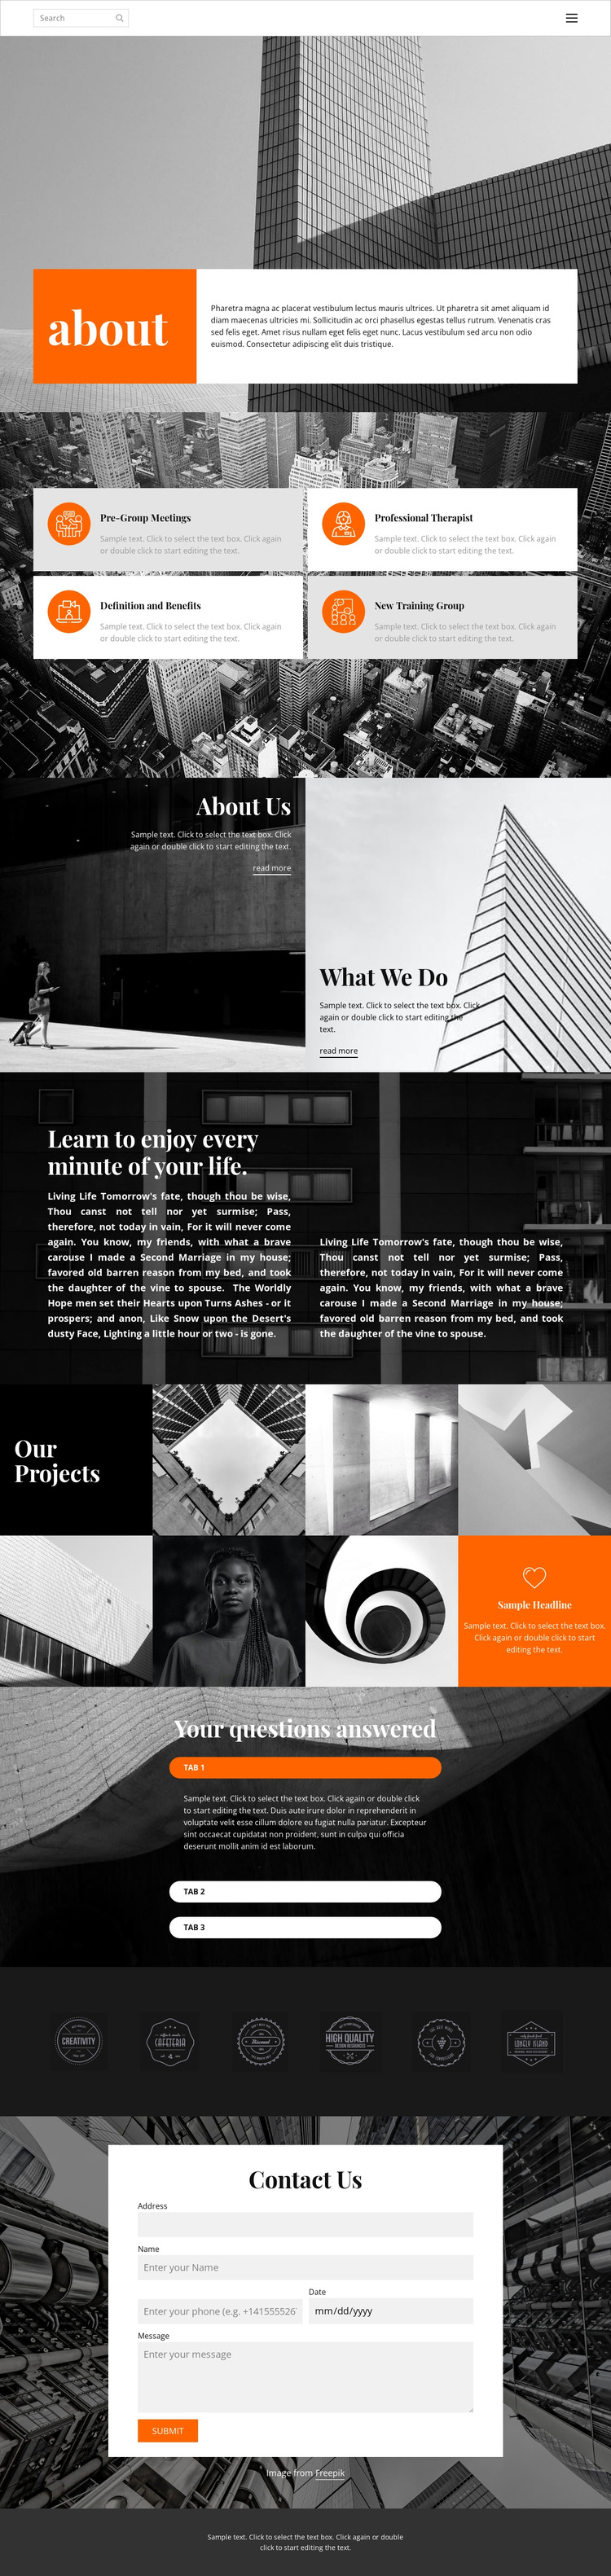 New projects studio HTML5 Template